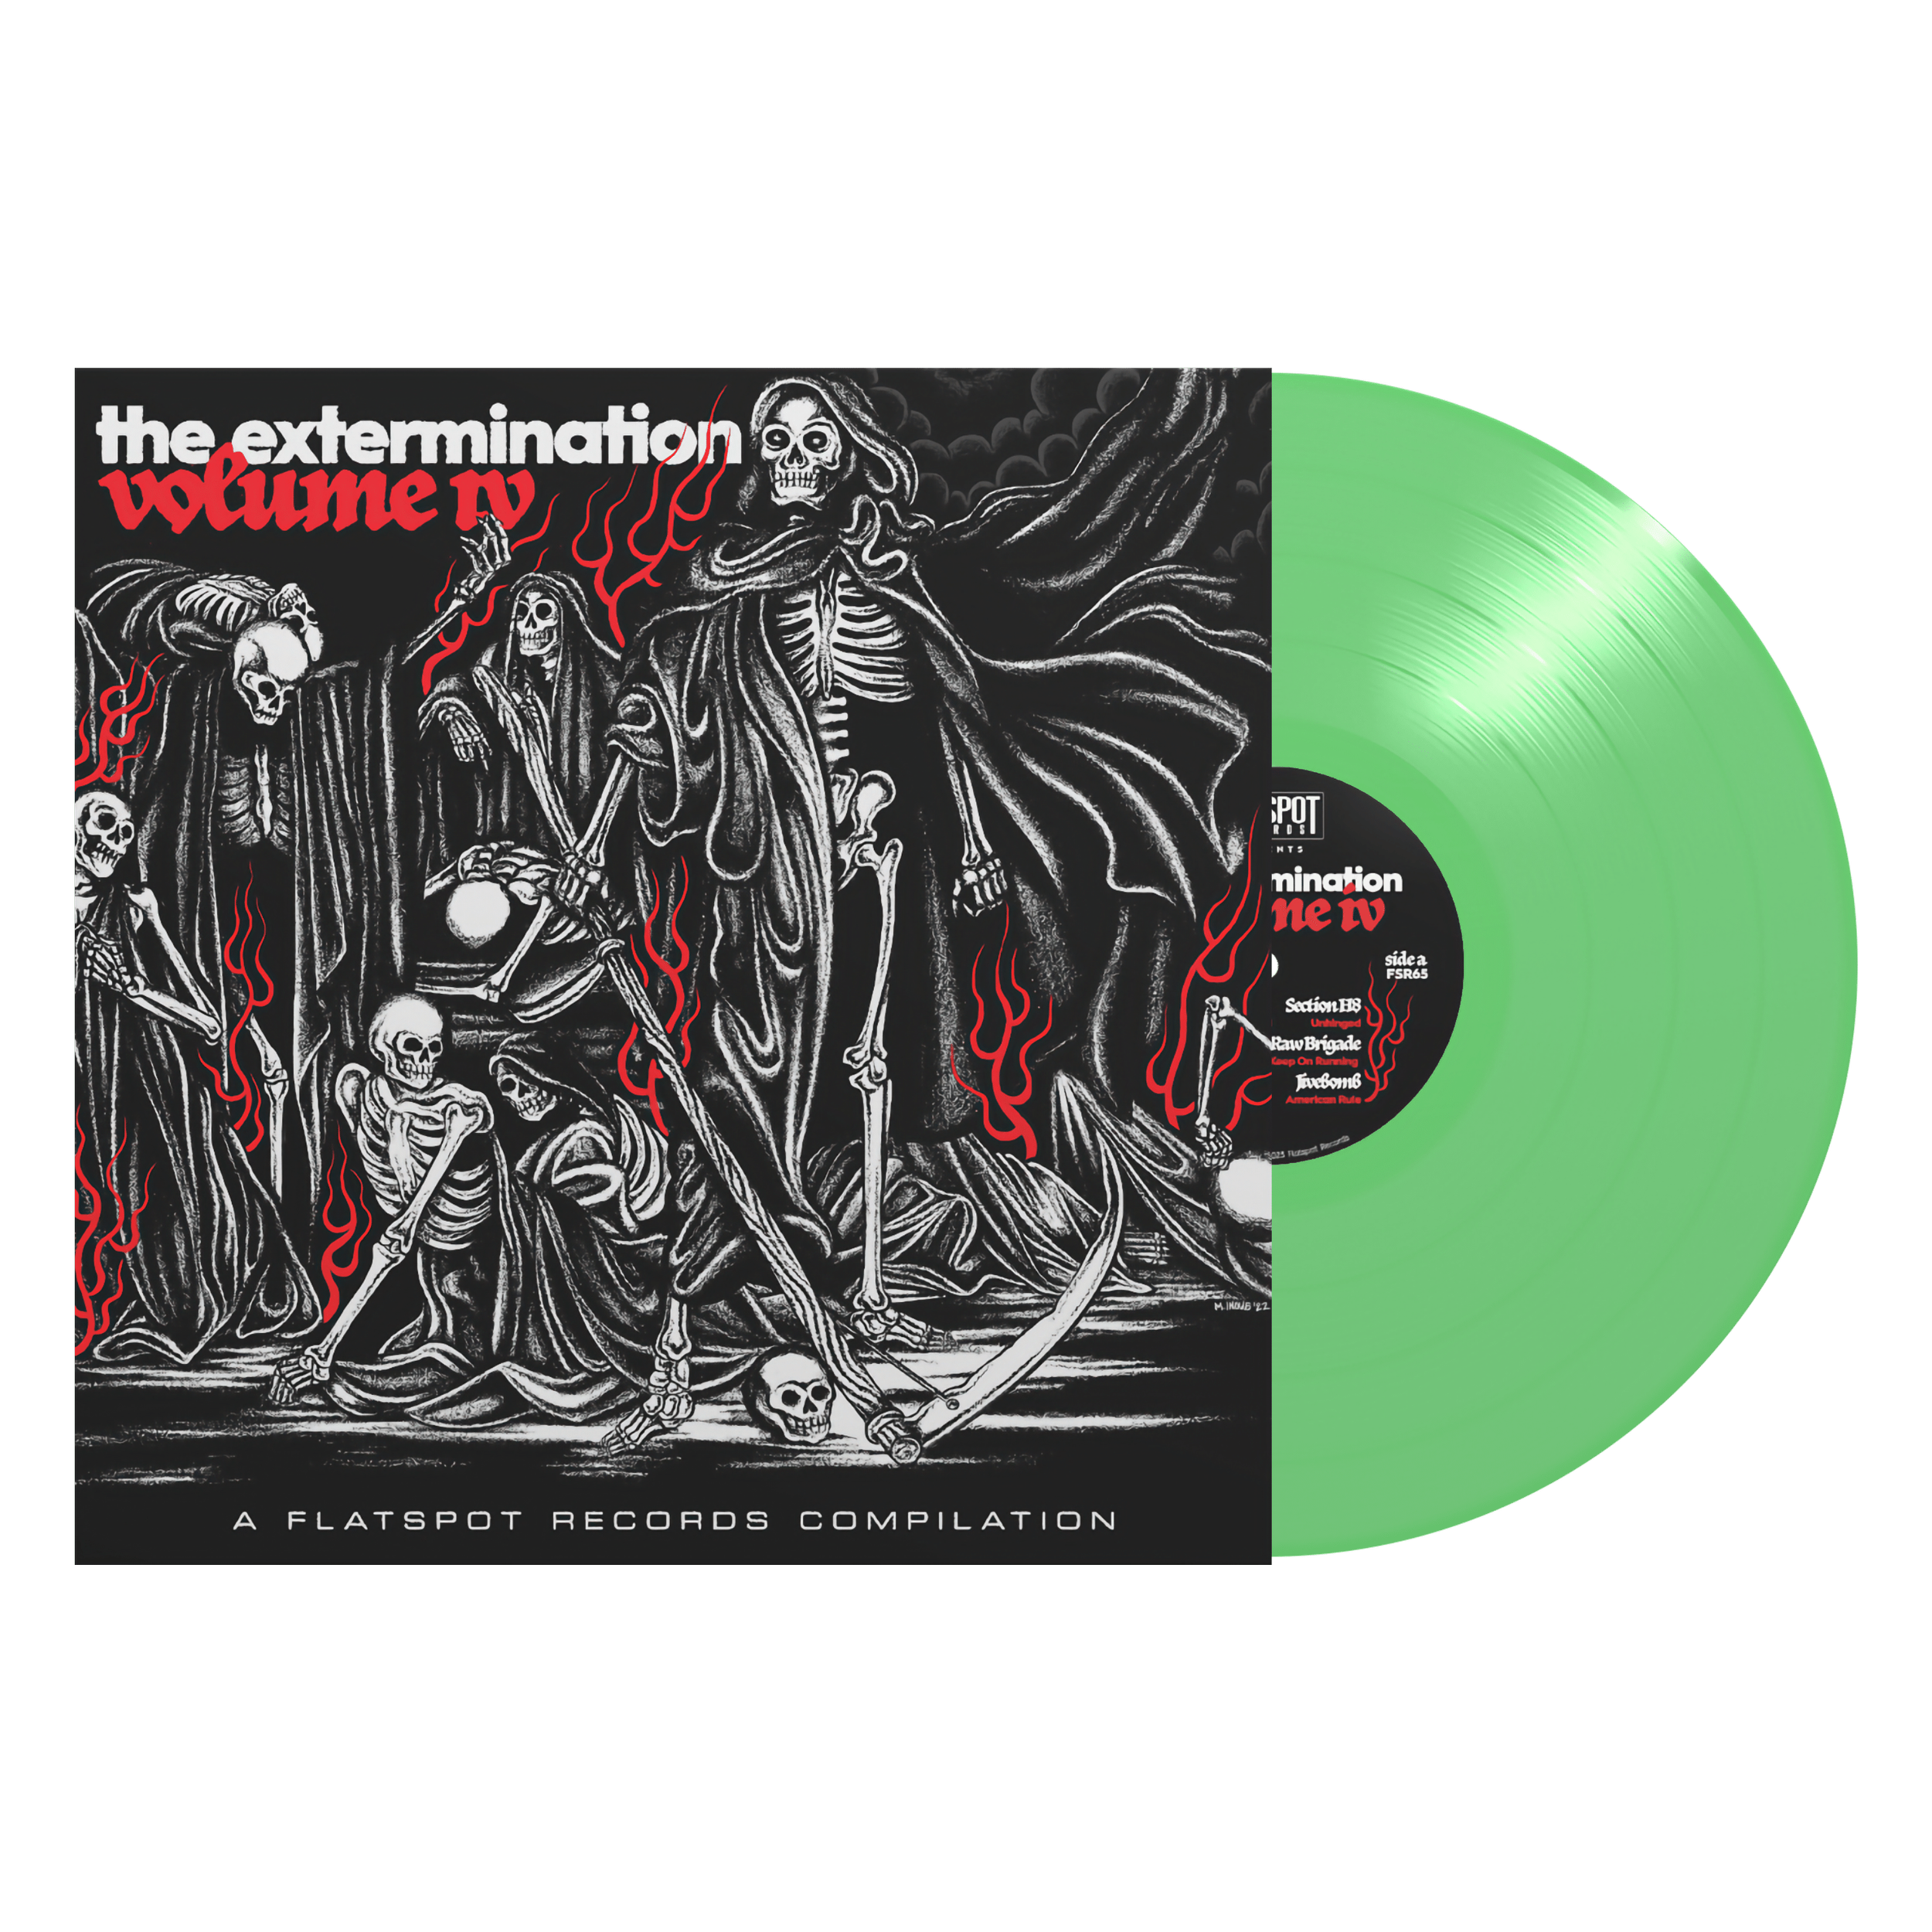 Various Artists - The Extermination Vol.4 Compilation - Vinyl - Green.png